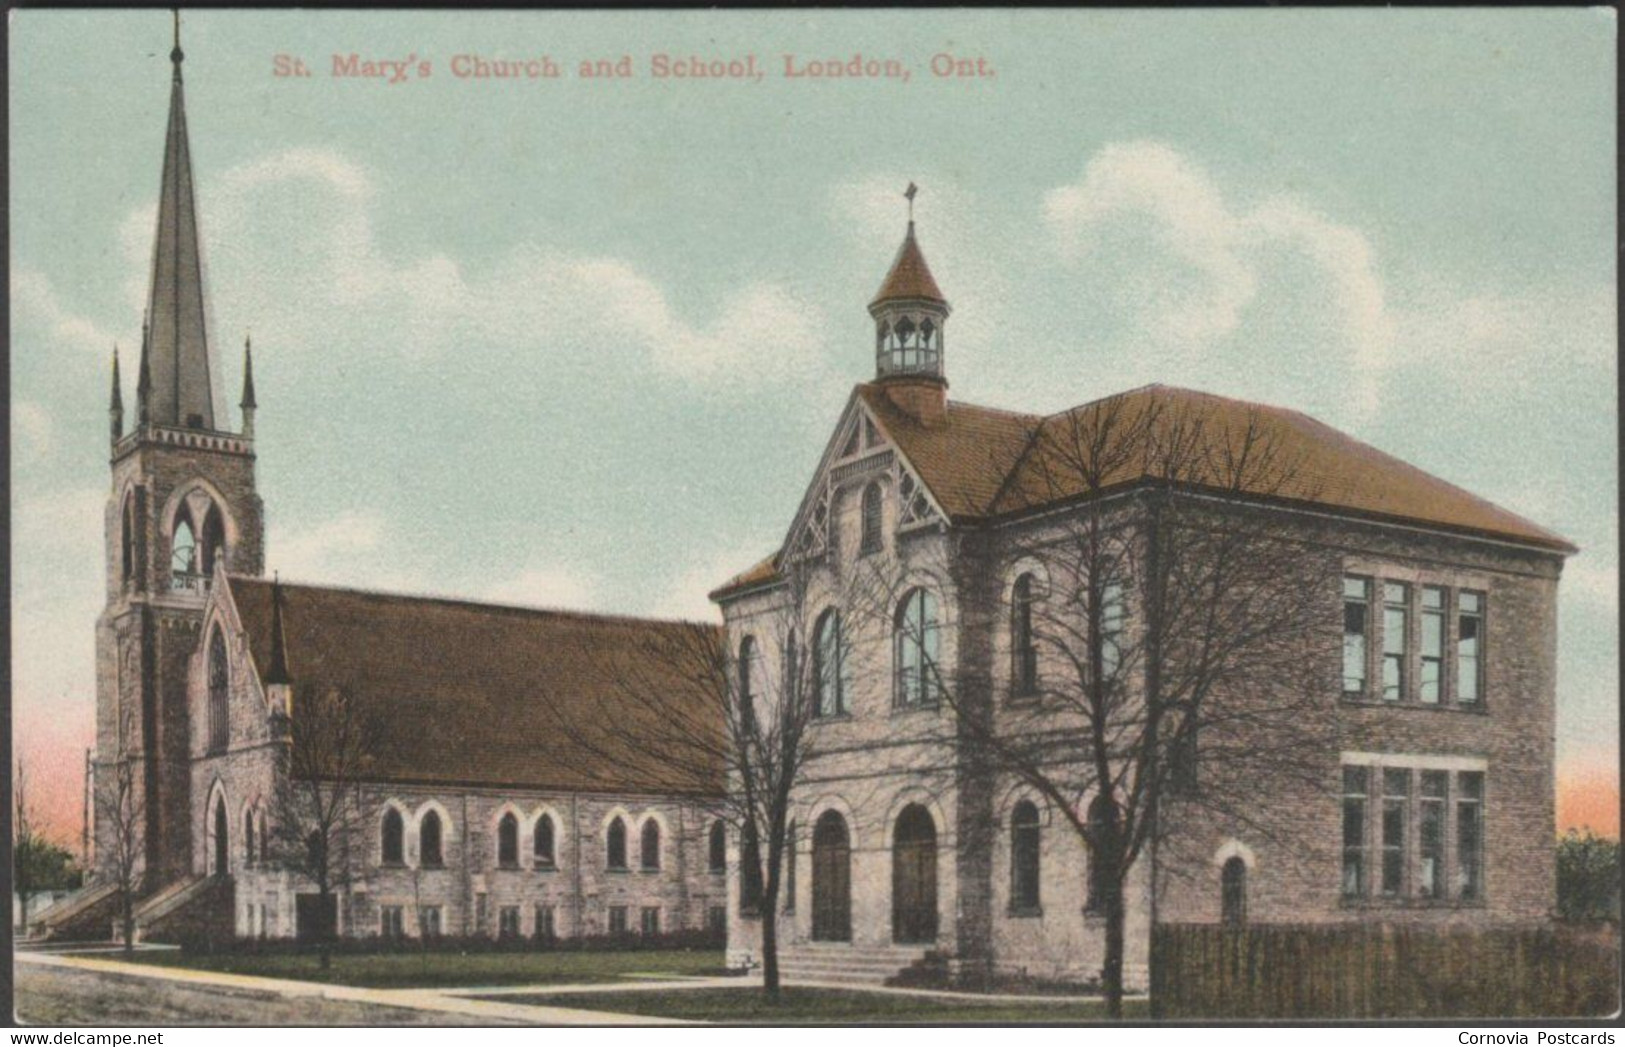 St Mary's Church And School, London, Ontario, C.1905-10 - Red Star News Co Postcard - London